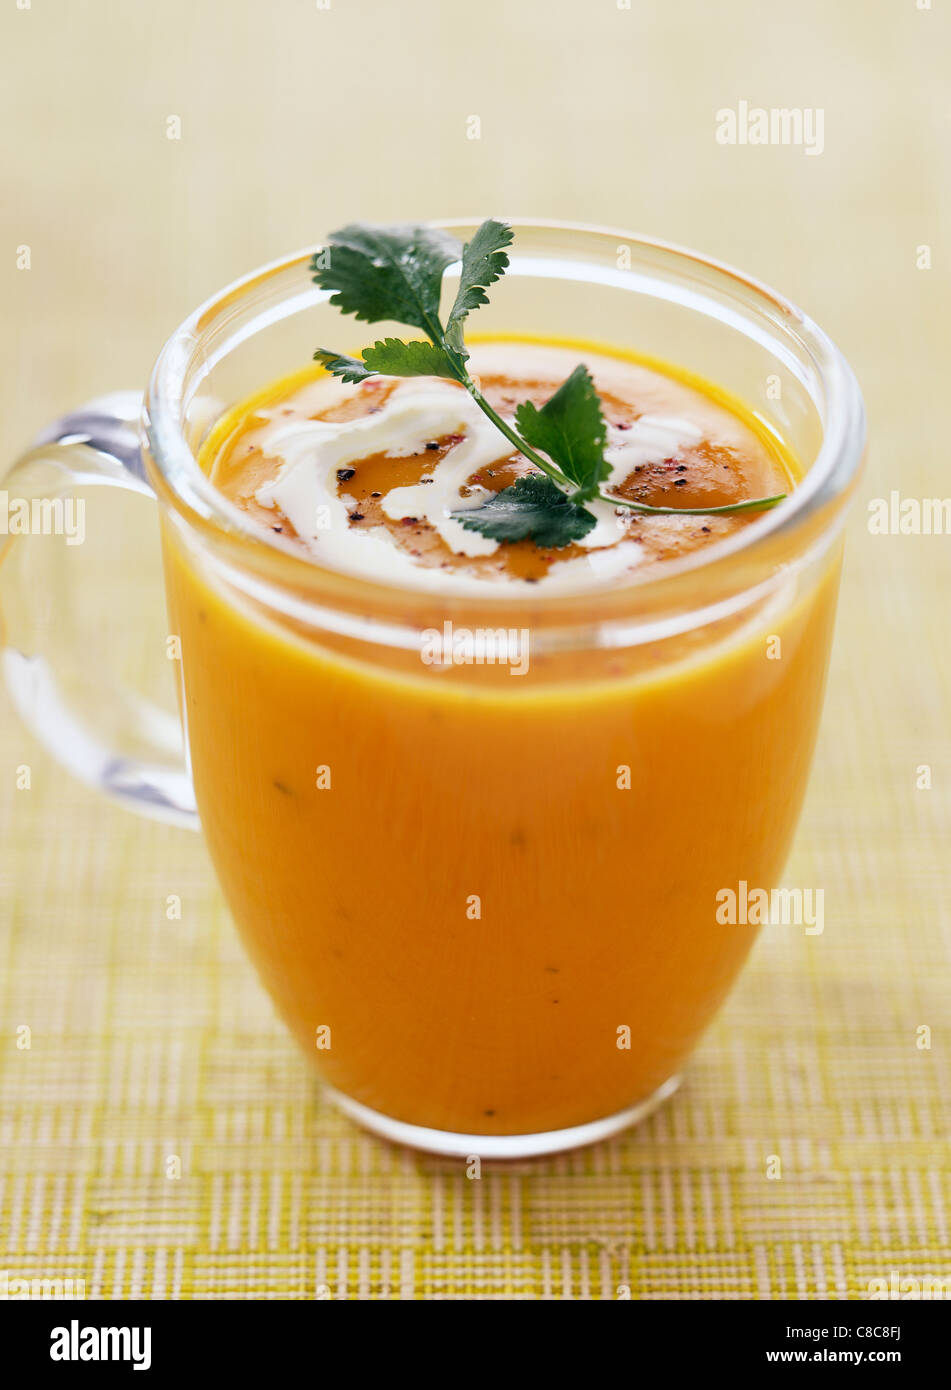 Spicy carrot soup Stock Photo